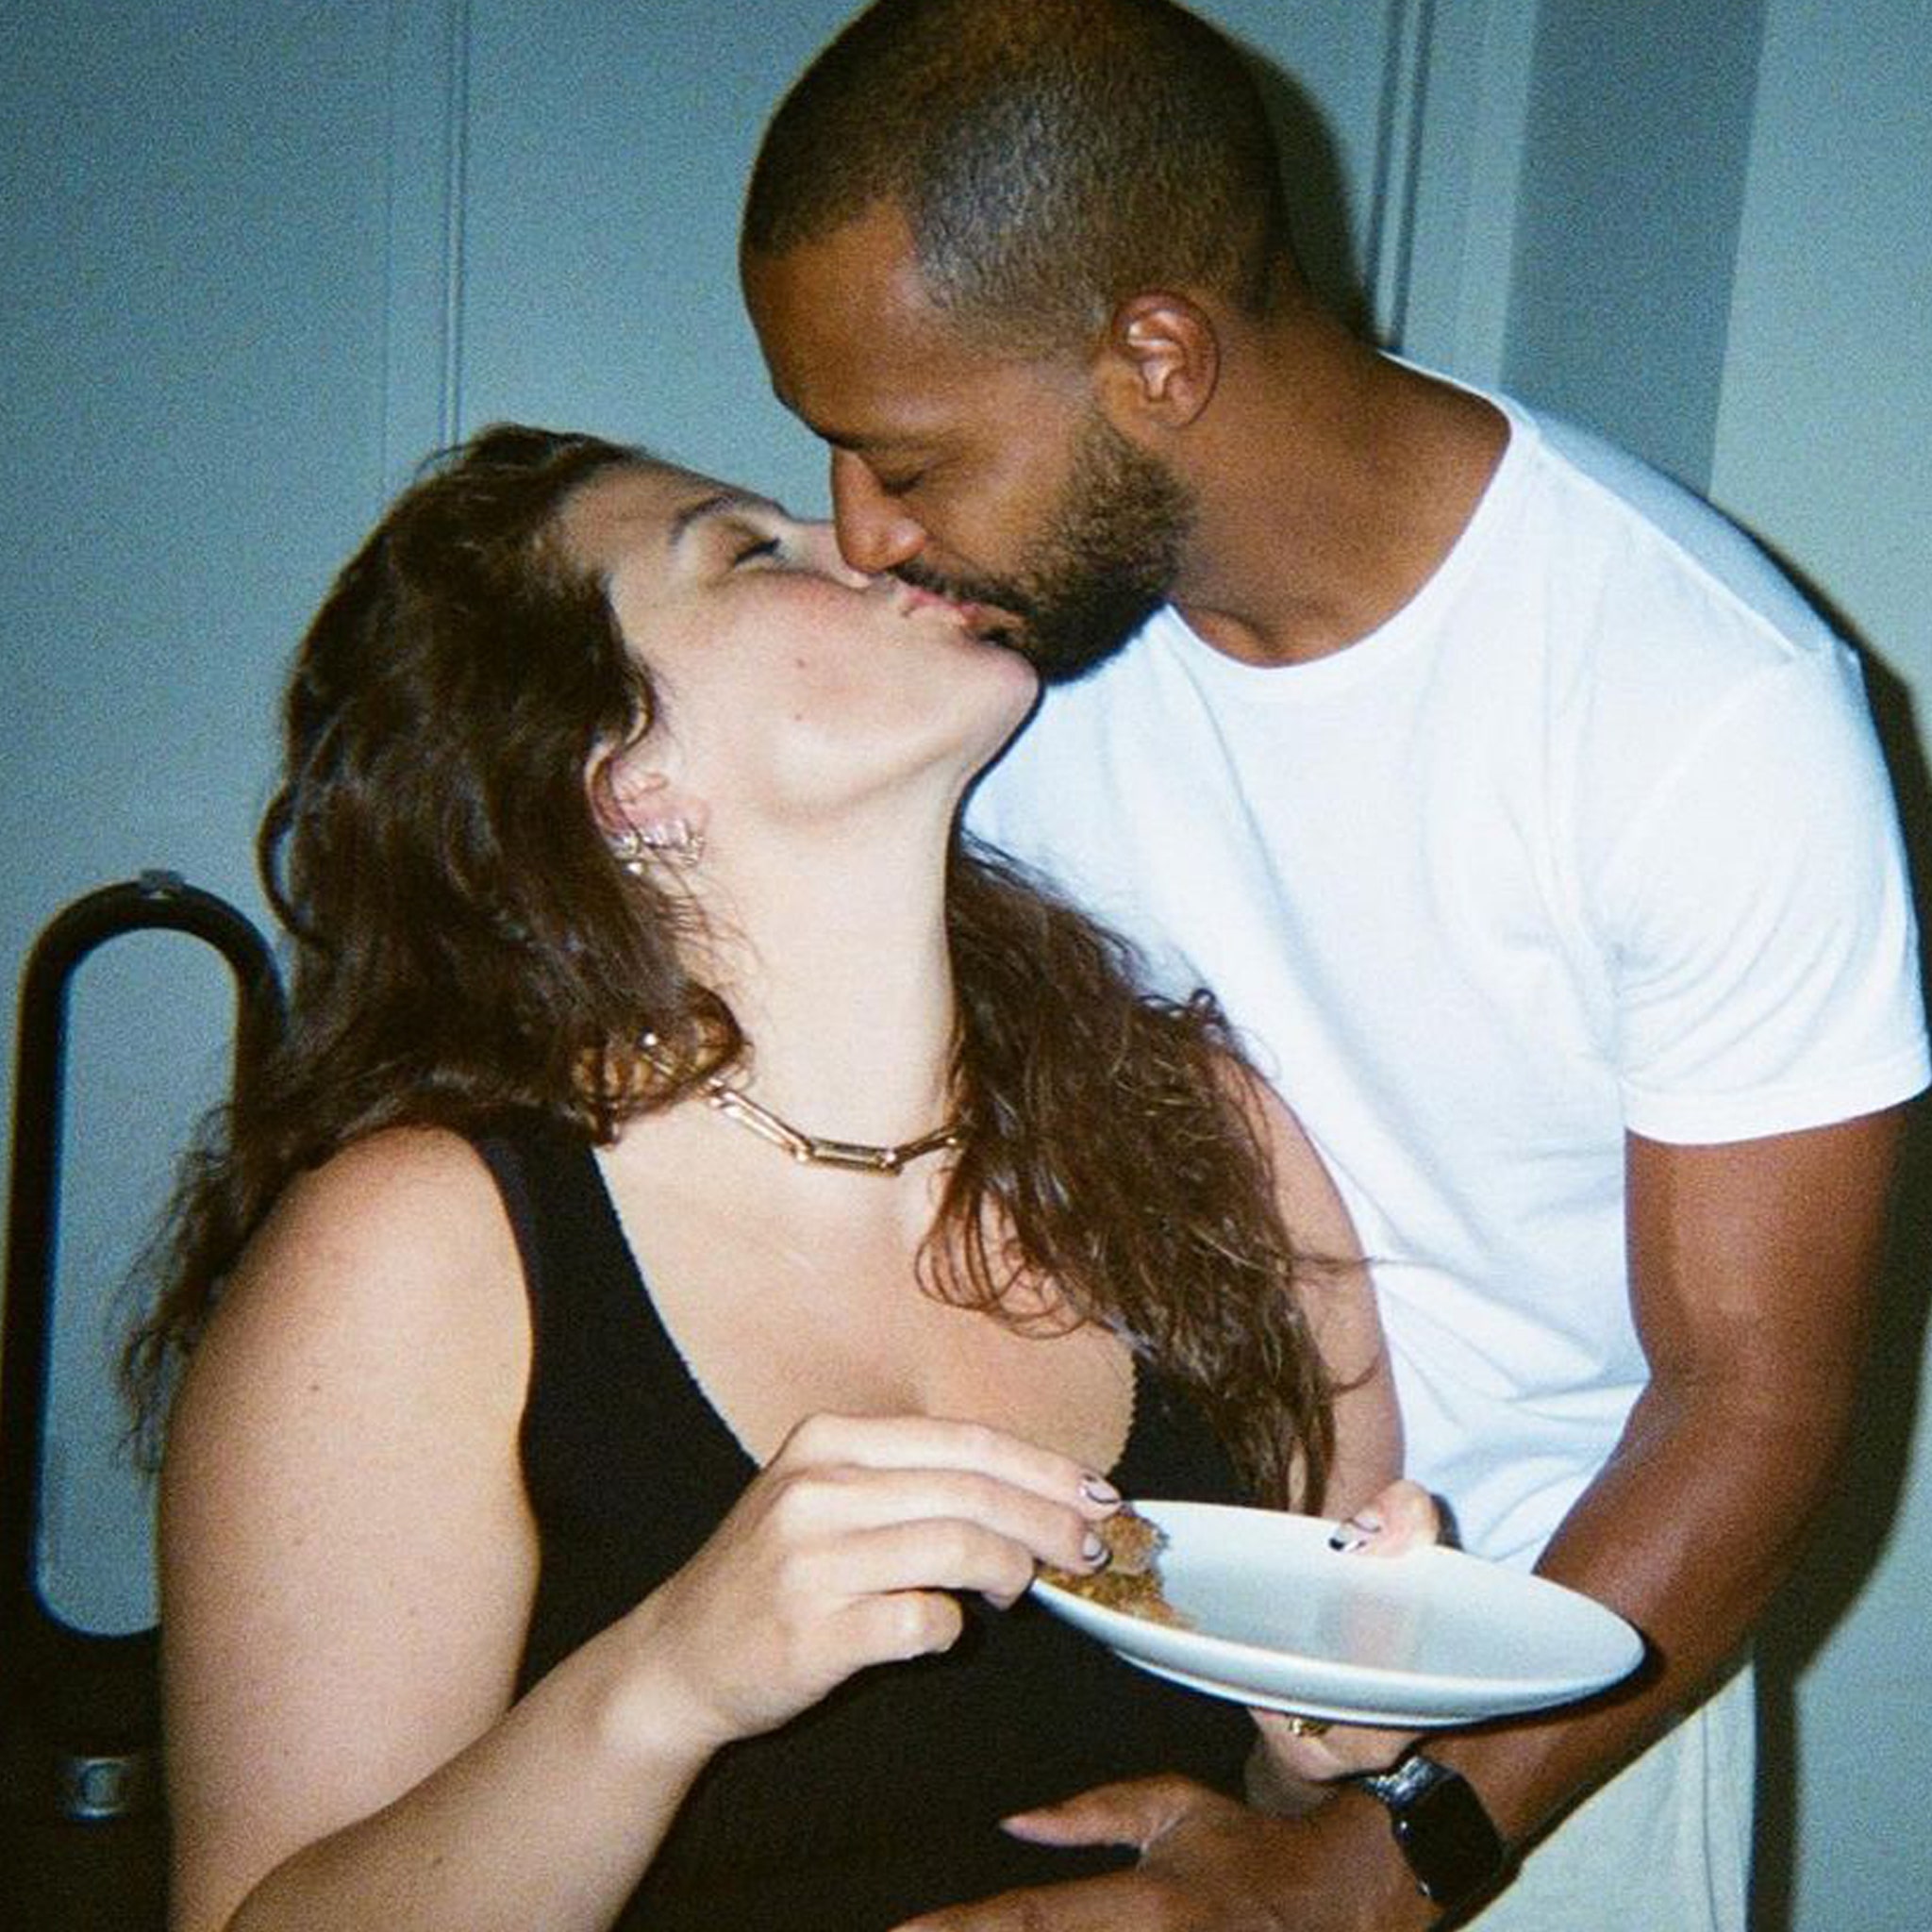 Ashley Graham Gives Birth To Twins At Home With Justin Ervin